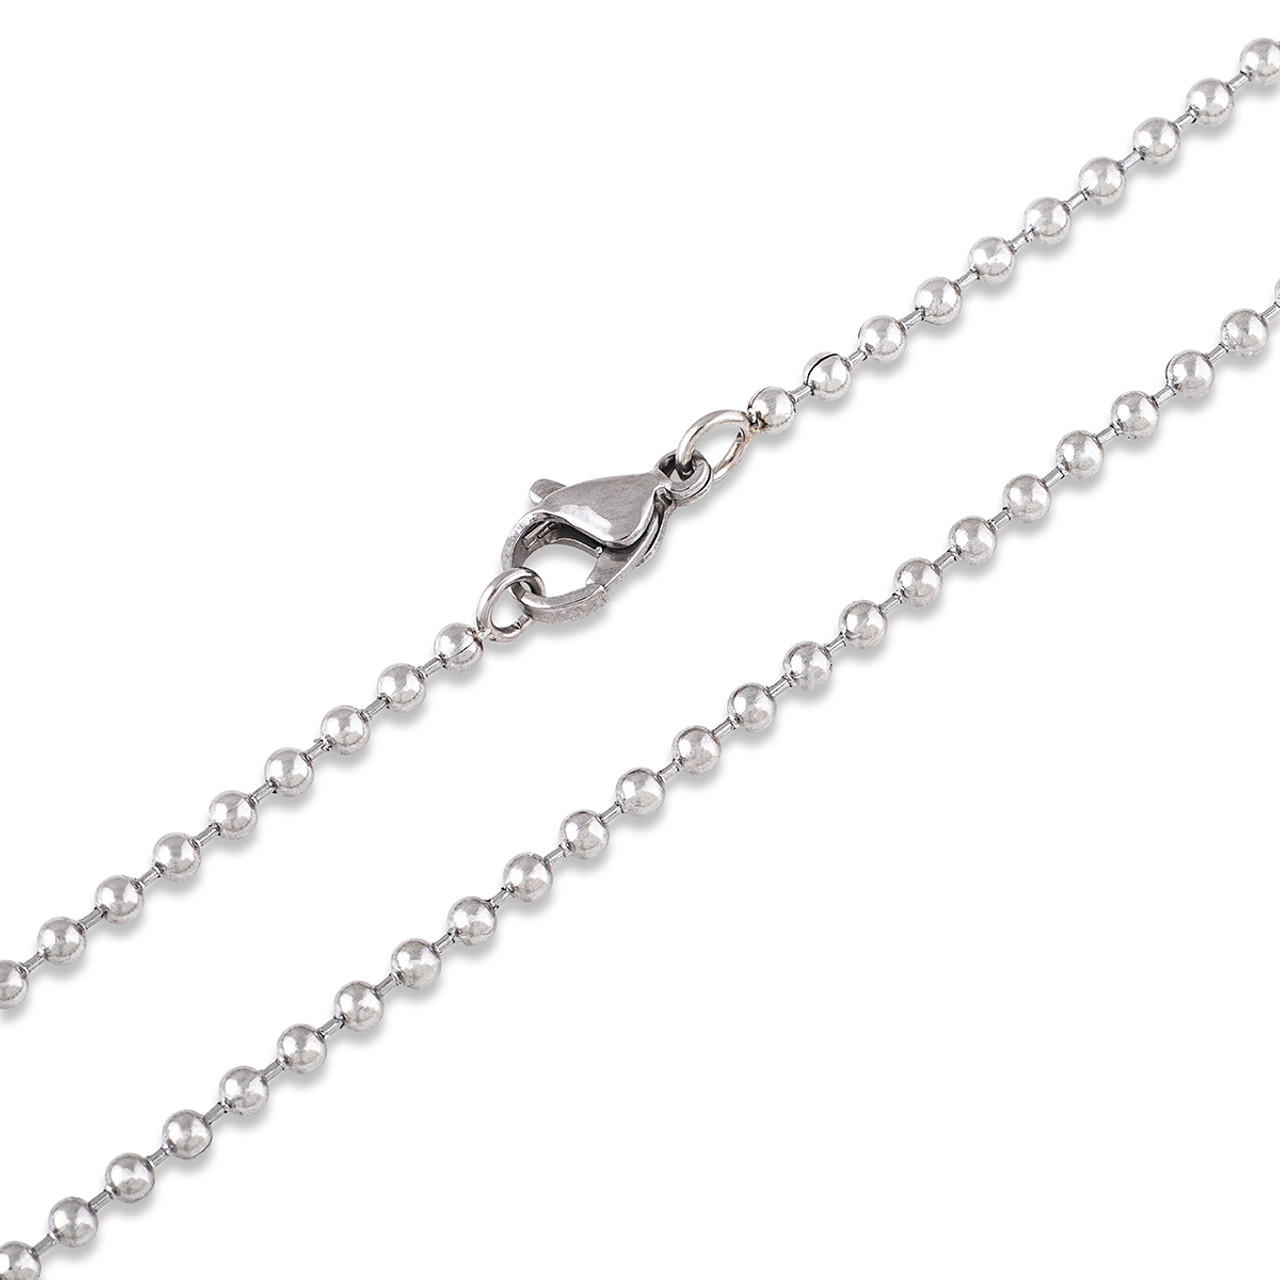 Classic Mens Necklace 316L Stainless Steel Silver Chain Color 18